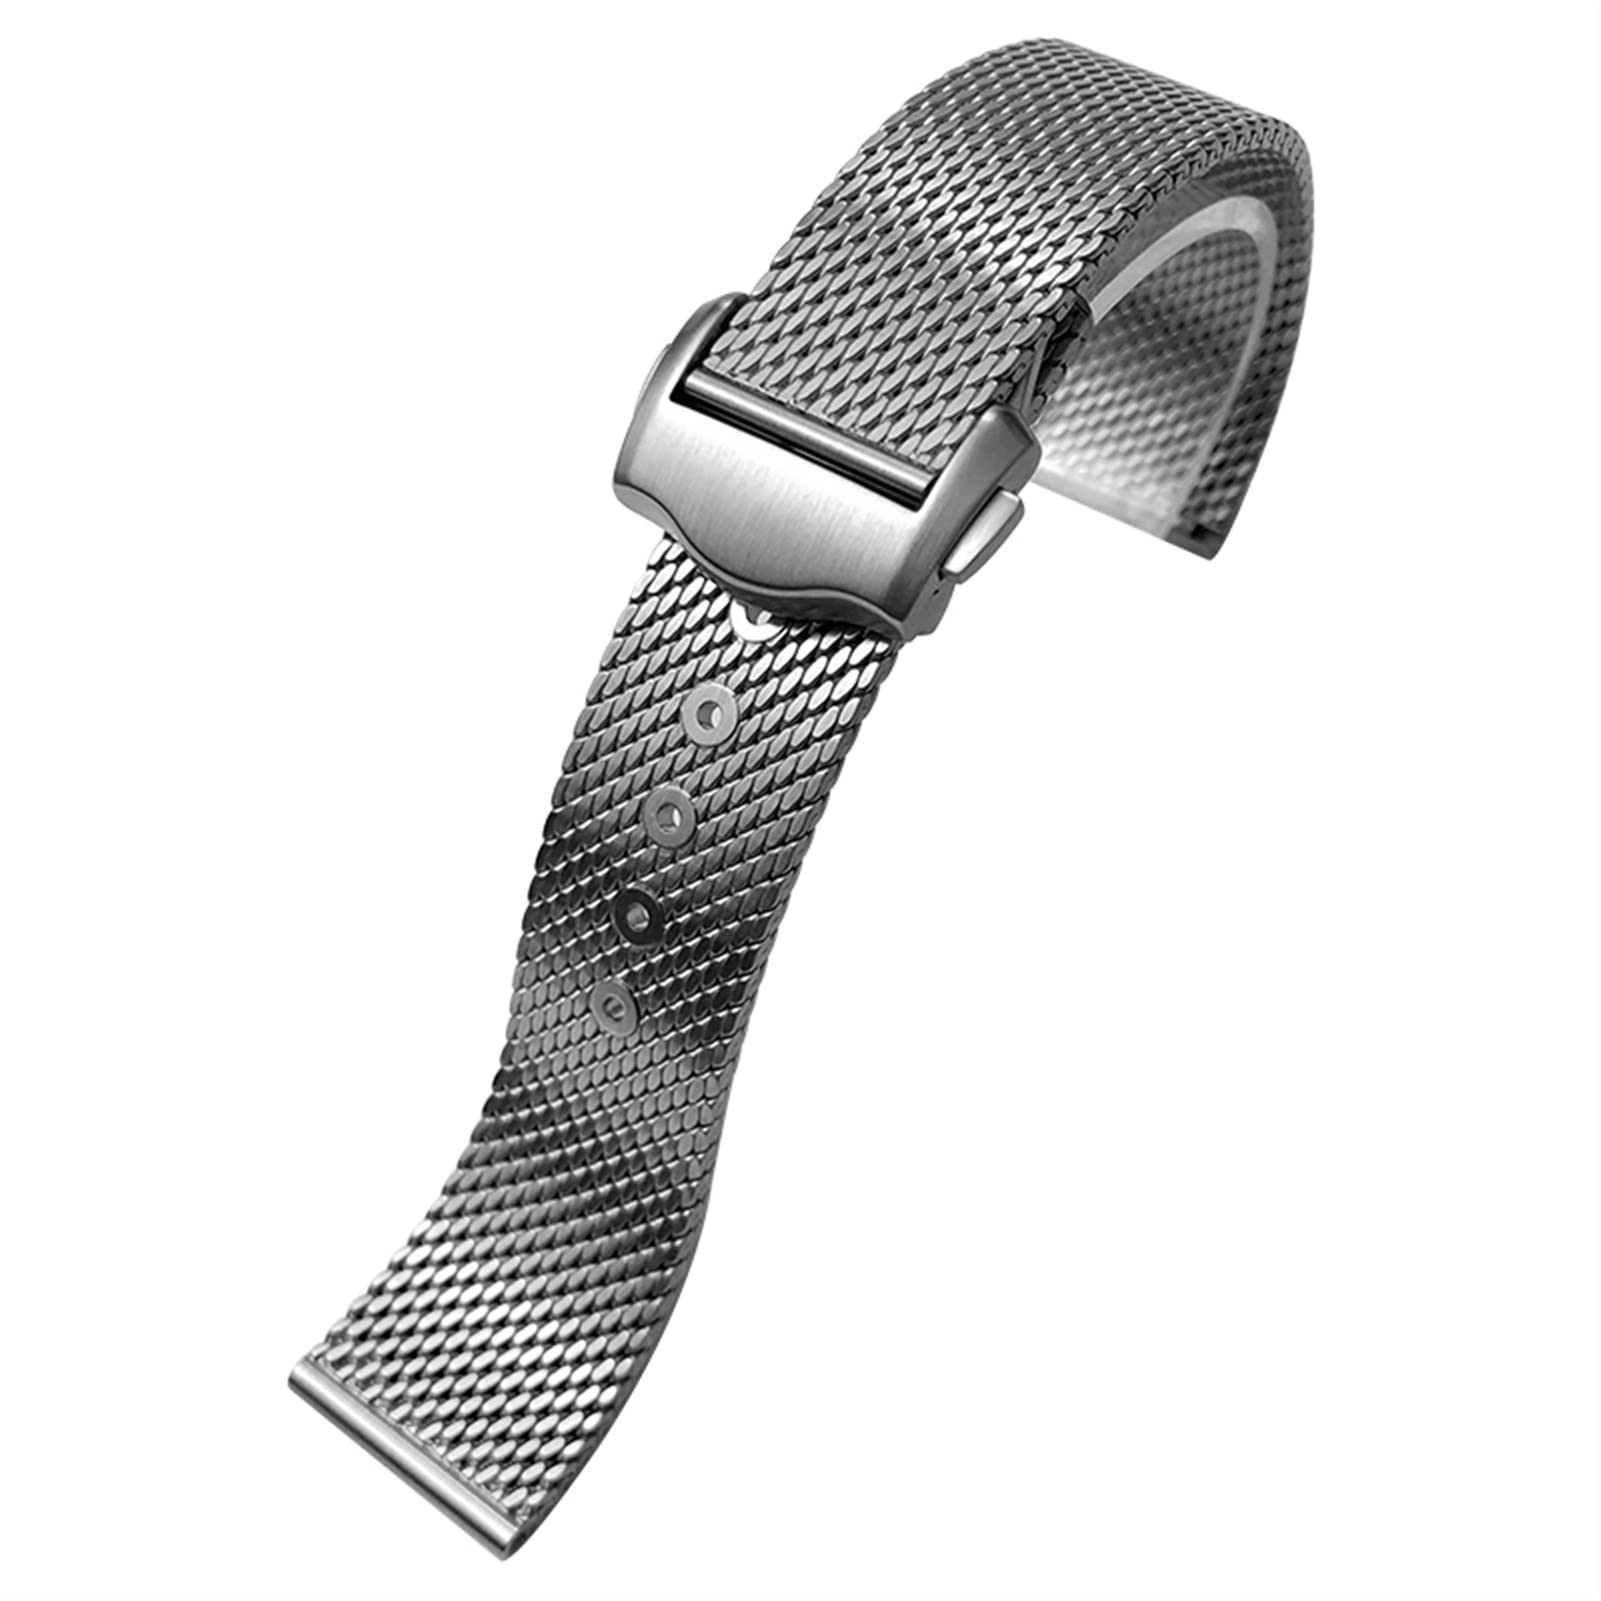 Wscebck 20mm Titanium Steel Braided Watchband Fit for Omega 007 Seamaster James Bond Watch Band Strap Deployment Buckle (Color : Silver, Size : for Omega 20mm)